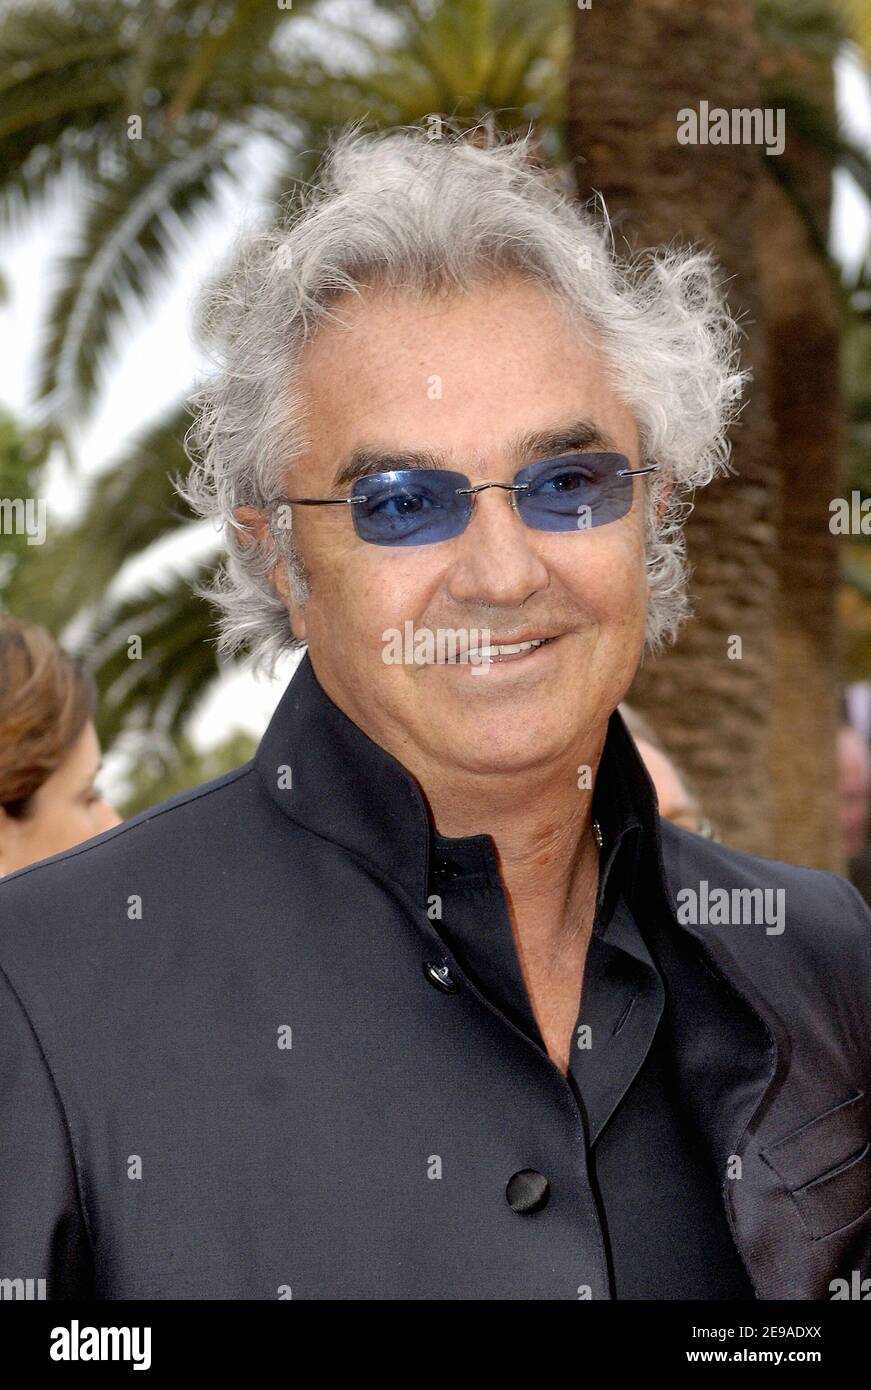 Renault Formula One managing director, Italian Flavio Briatore, upon arrival for the screening of Mexican director Alejandro Gonzalez Inarritu's film 'Babel' presented out of competition during the 59th Cannes Film Festival, in Cannes, France, on May 23, 2006. Photo by Giancarlo Gorassini/ABACAPRESS.COM Stock Photo